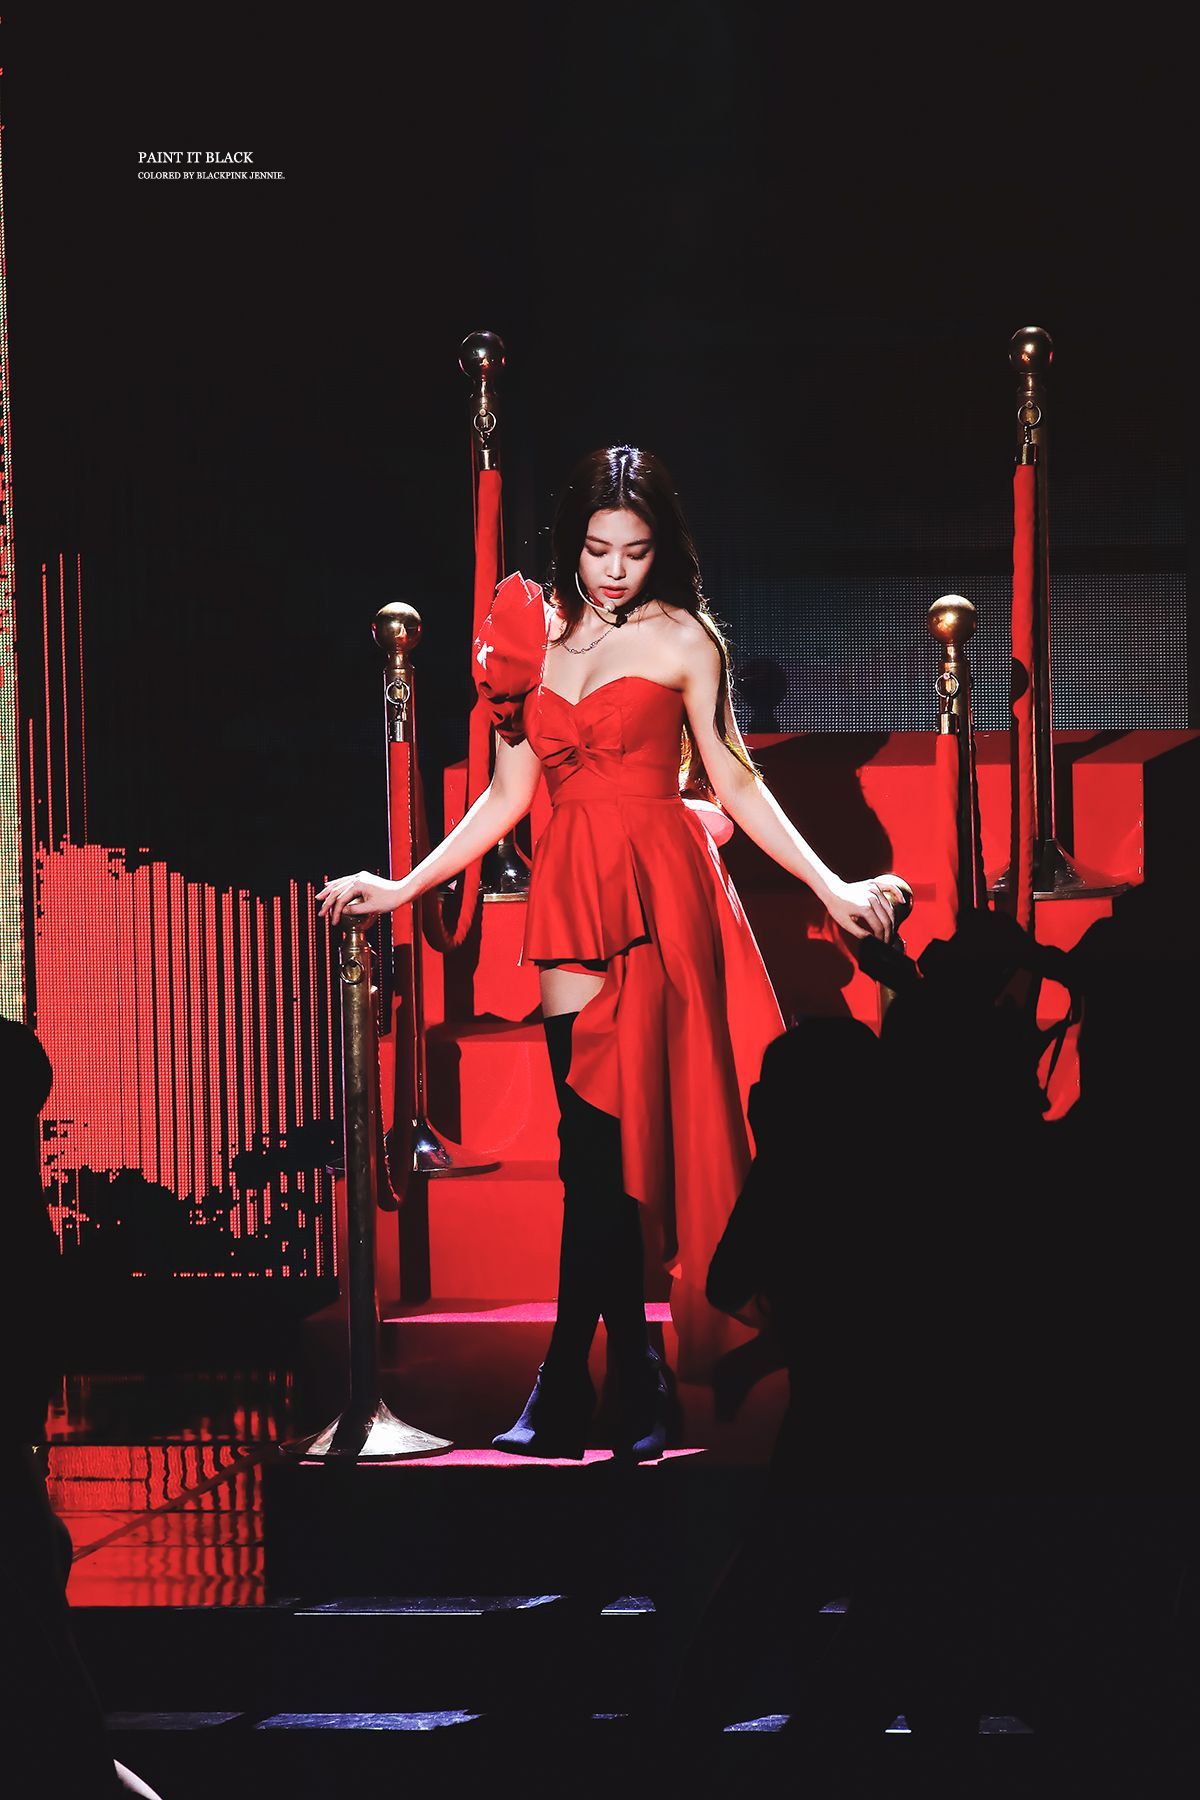 Rosé of Blackpink in a red dress and black knee-high boots - Jennie